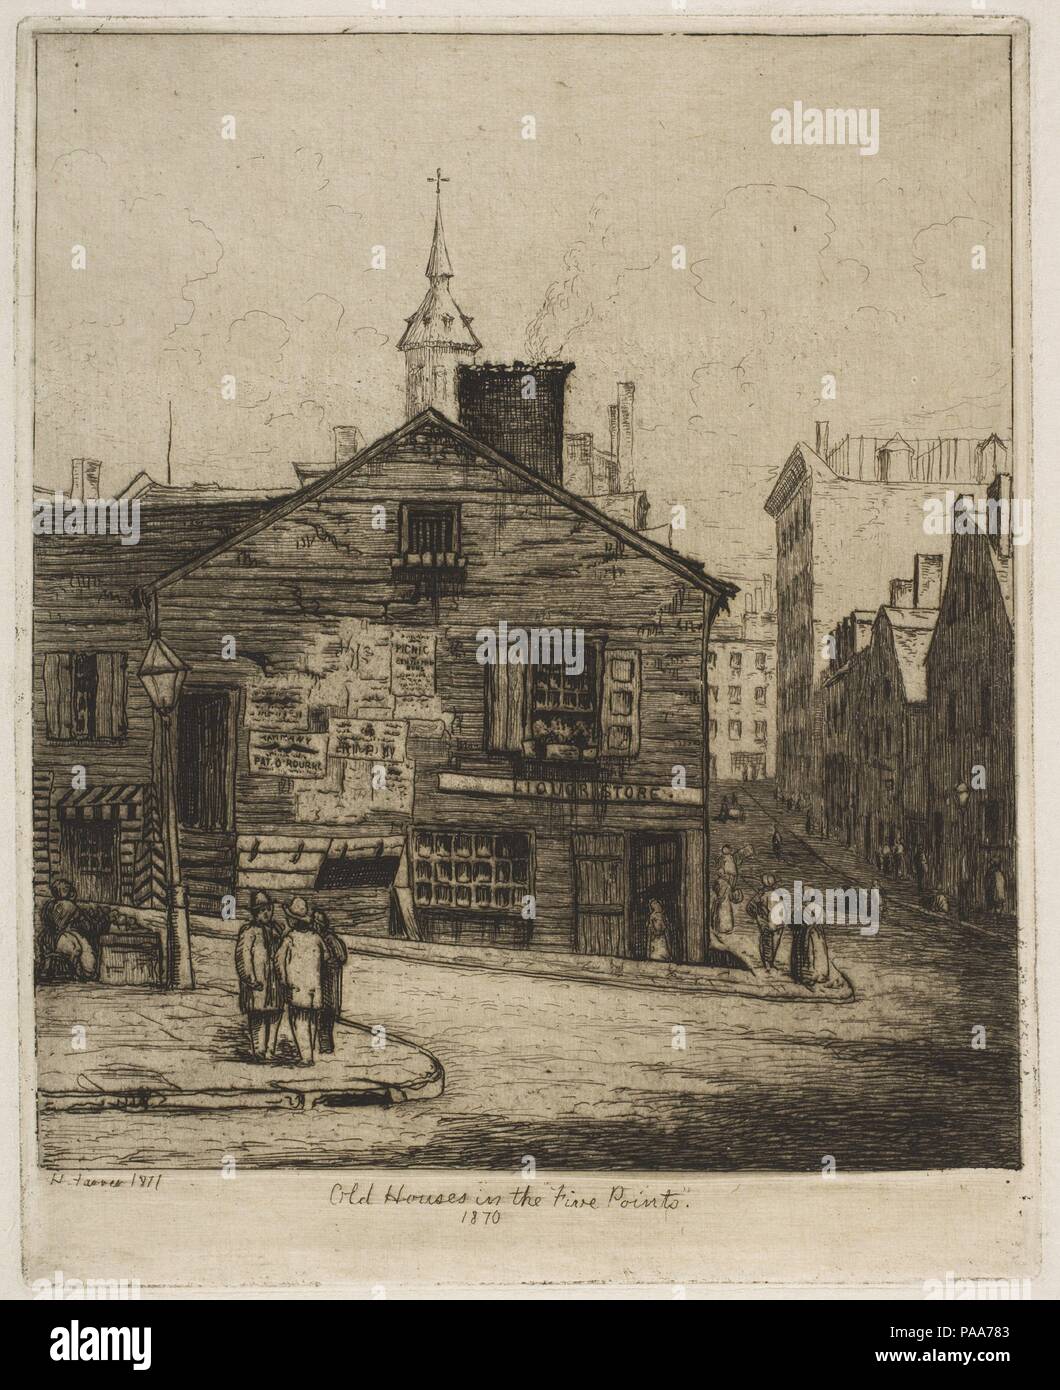 Old Houses in the 'Five Points', 1870 (from Scenes of Old New York). Artist: Henry Farrer (American, London 1844-1903 New York). Dimensions: plate: 6 1/4 x 5 in. (15.8 x 12.7 cm)  sheet: 7 5/16 x 5 13/16 in. (18.5 x 14.7 cm). Date: 1871. Museum: Metropolitan Museum of Art, New York, USA. Stock Photo